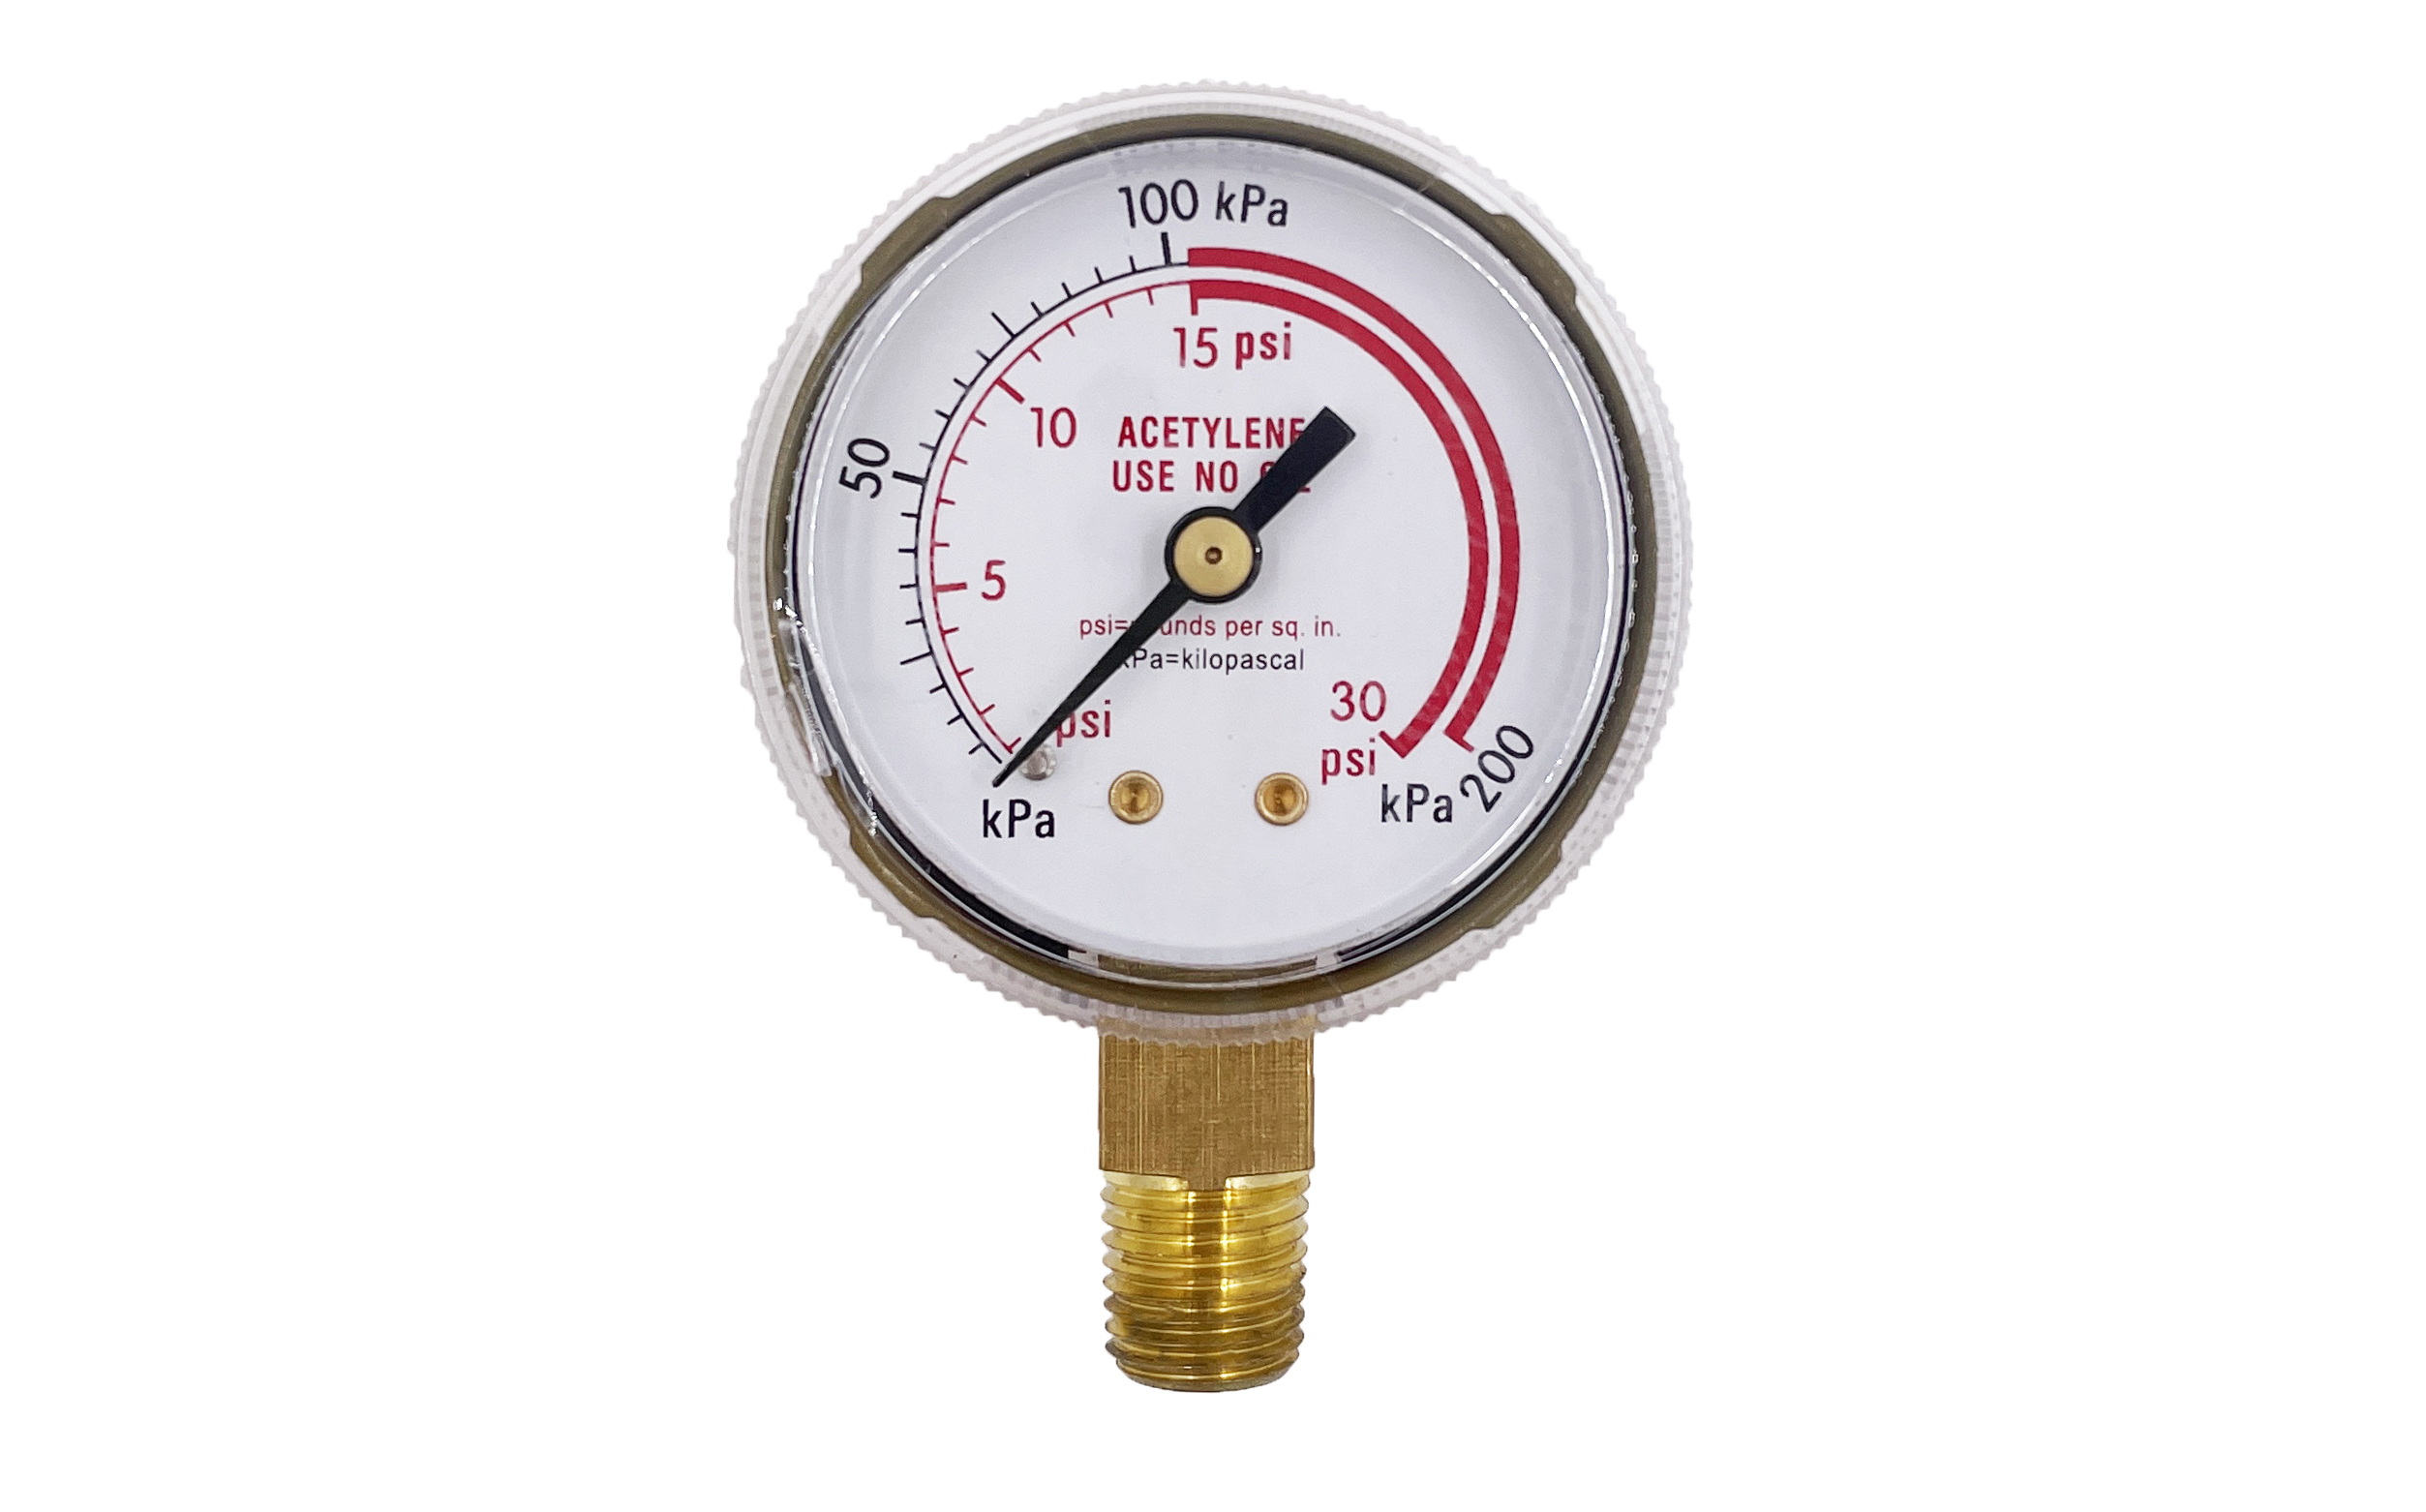 Vancouver a company bought a batch of pressure gauges